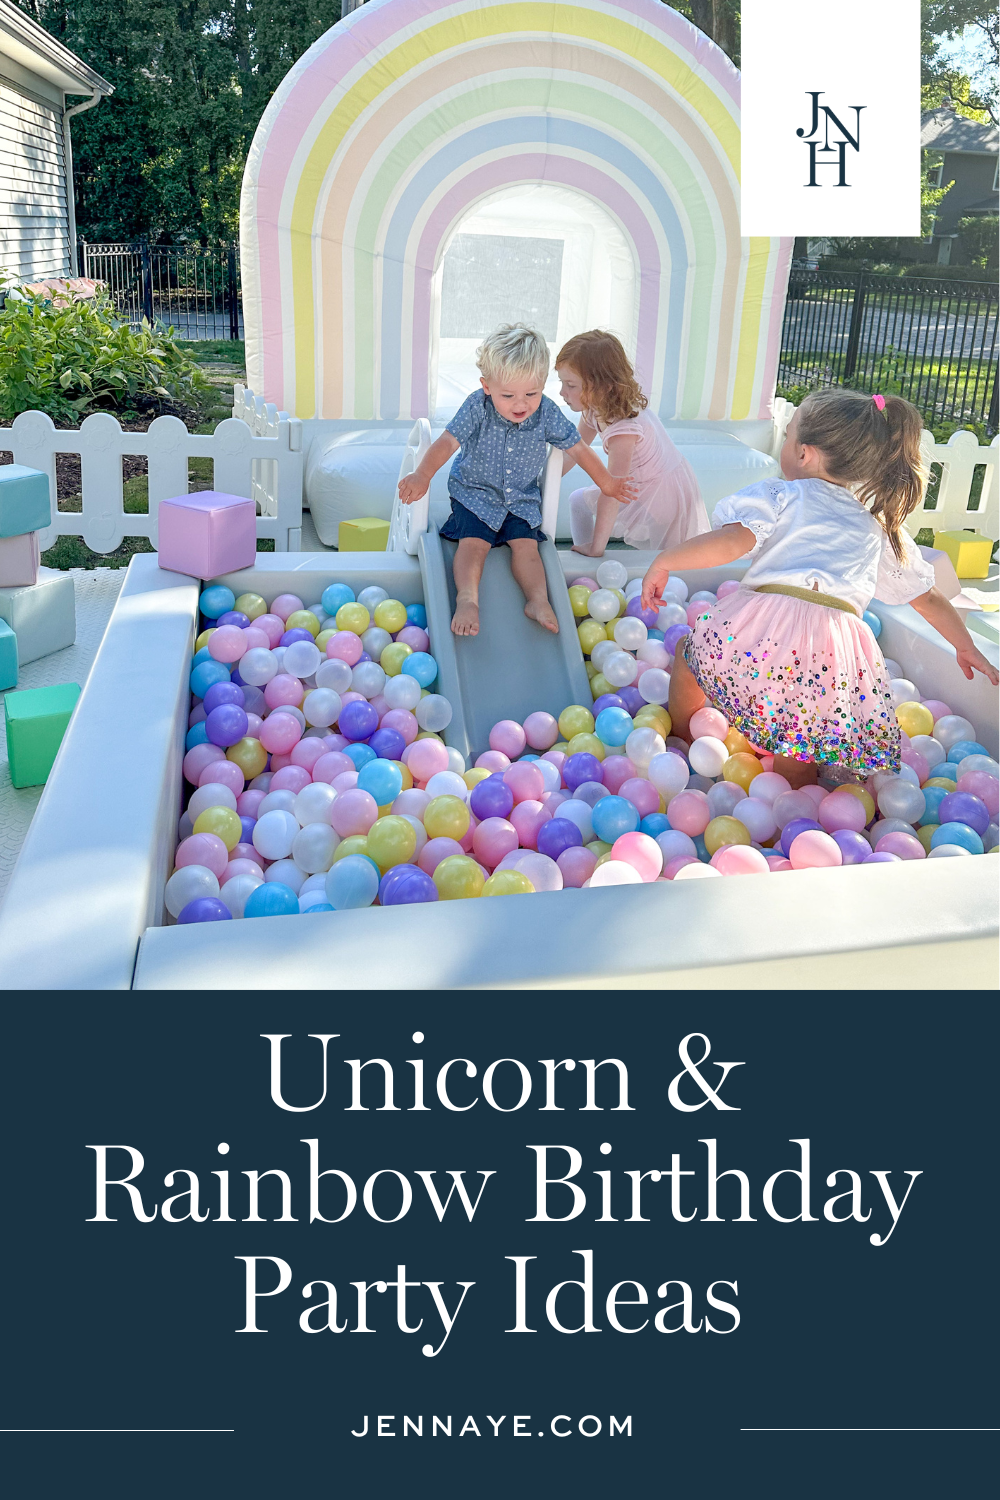 Let's Have a Ball Birthday Party Decorations Primary -   Ball birthday  parties, Colorful birthday party, Rainbow birthday decorations